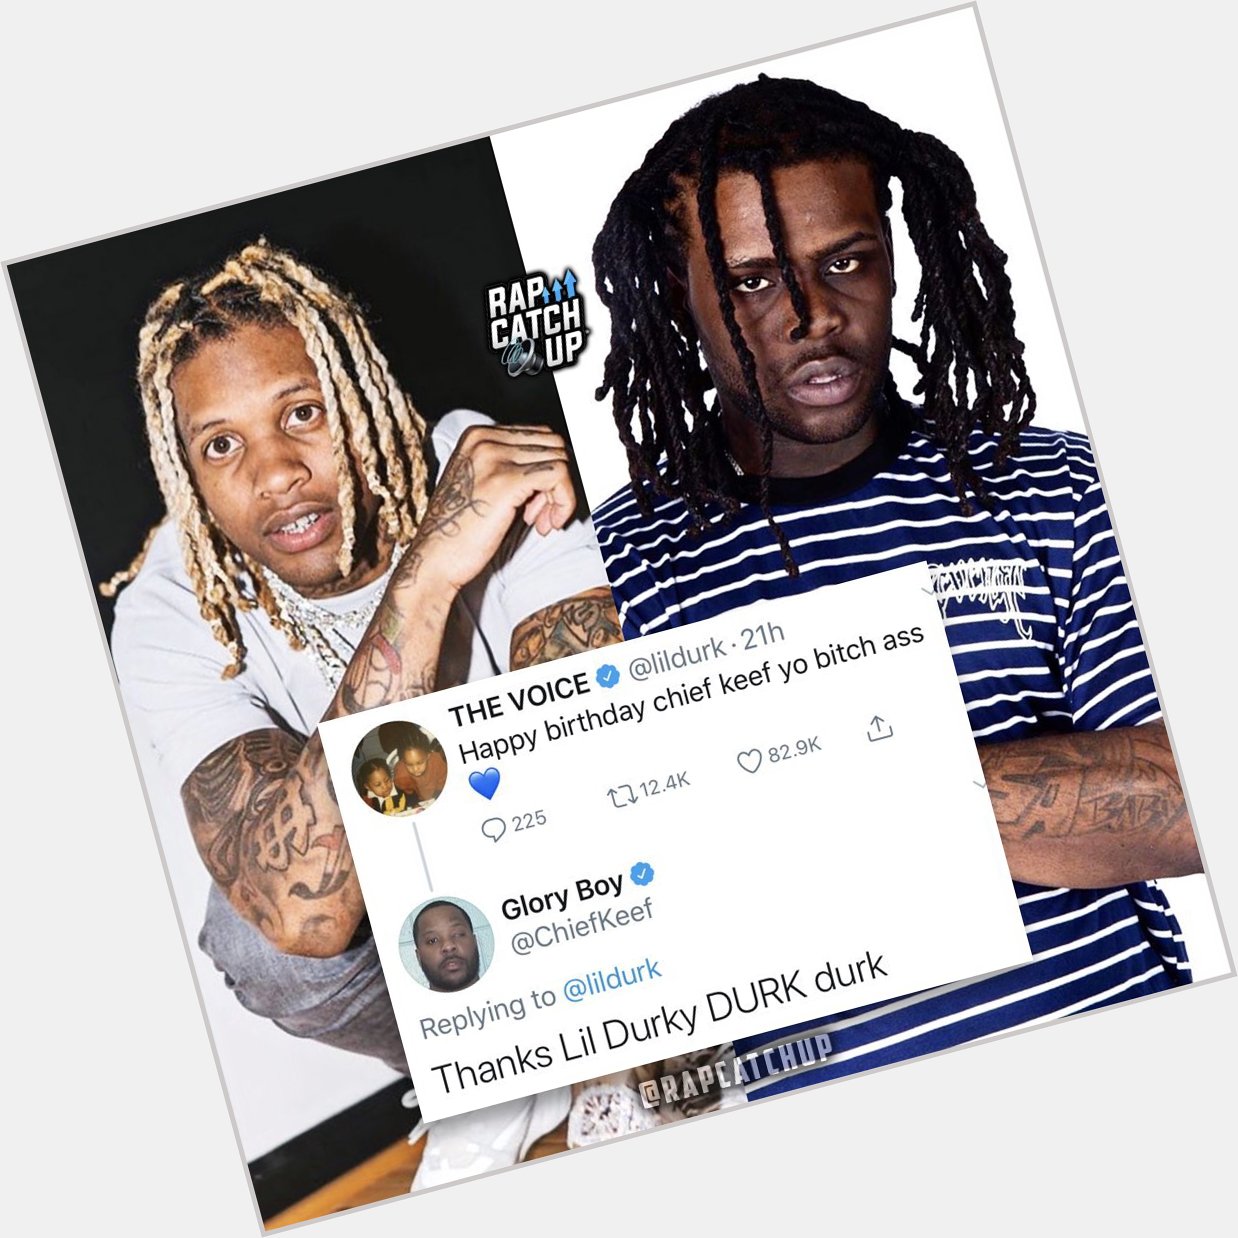 Throwback to when Lil Durk wished Sosa a happy birthday 